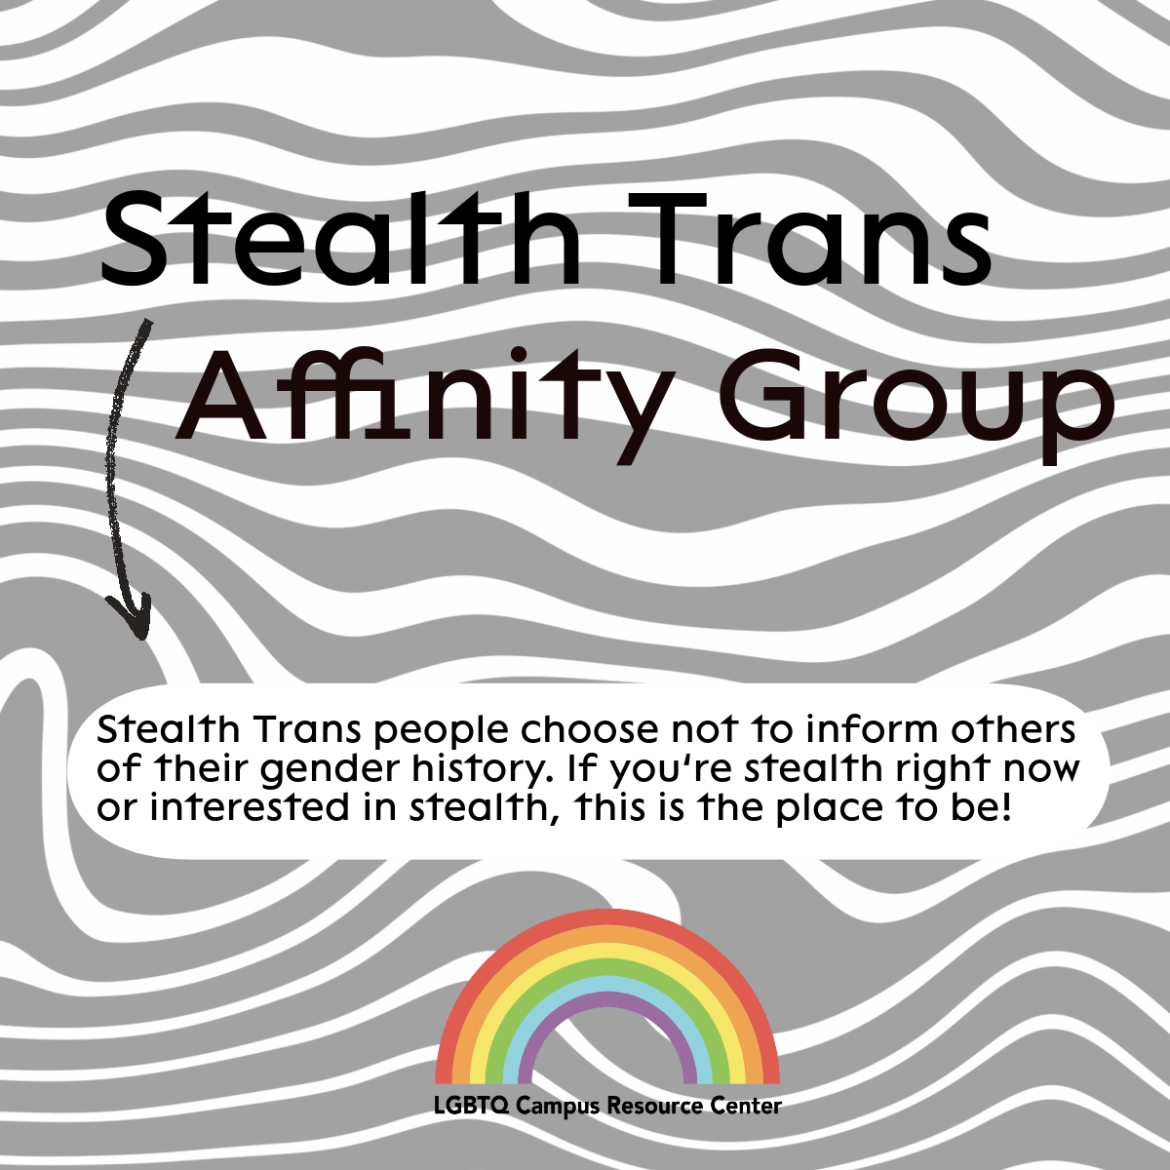 A square flyer with wavy gray lines and shape in the background. The text is in all black. The header reads, "Stealth Trans Affinity Group." An arrow from the header points down below to a text bubble at the bottom that reads, "Stealth Trans people choose not to inform other of their gender history. If you're stealth right now or interested in stealth, this is the place to be!" At the bottom of the flyer is the LGBTQ CRC rainbow signature. 